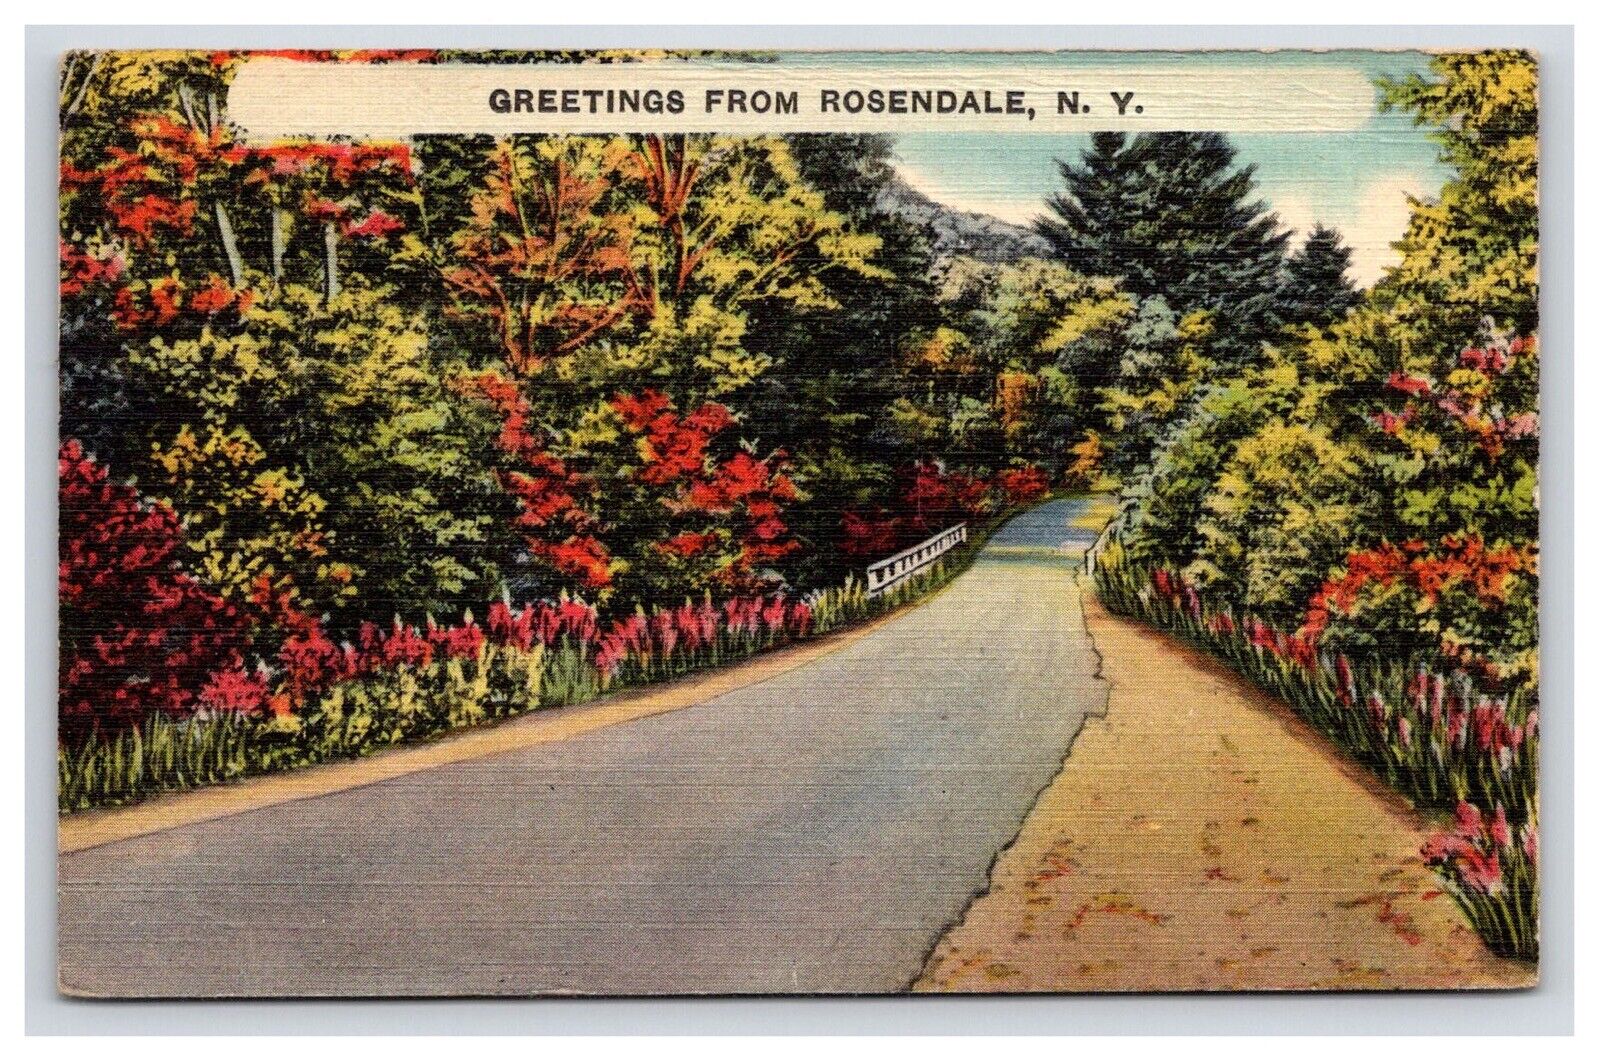 Postcard: NY 1945 Greetings From Rosendale, New York - Posted